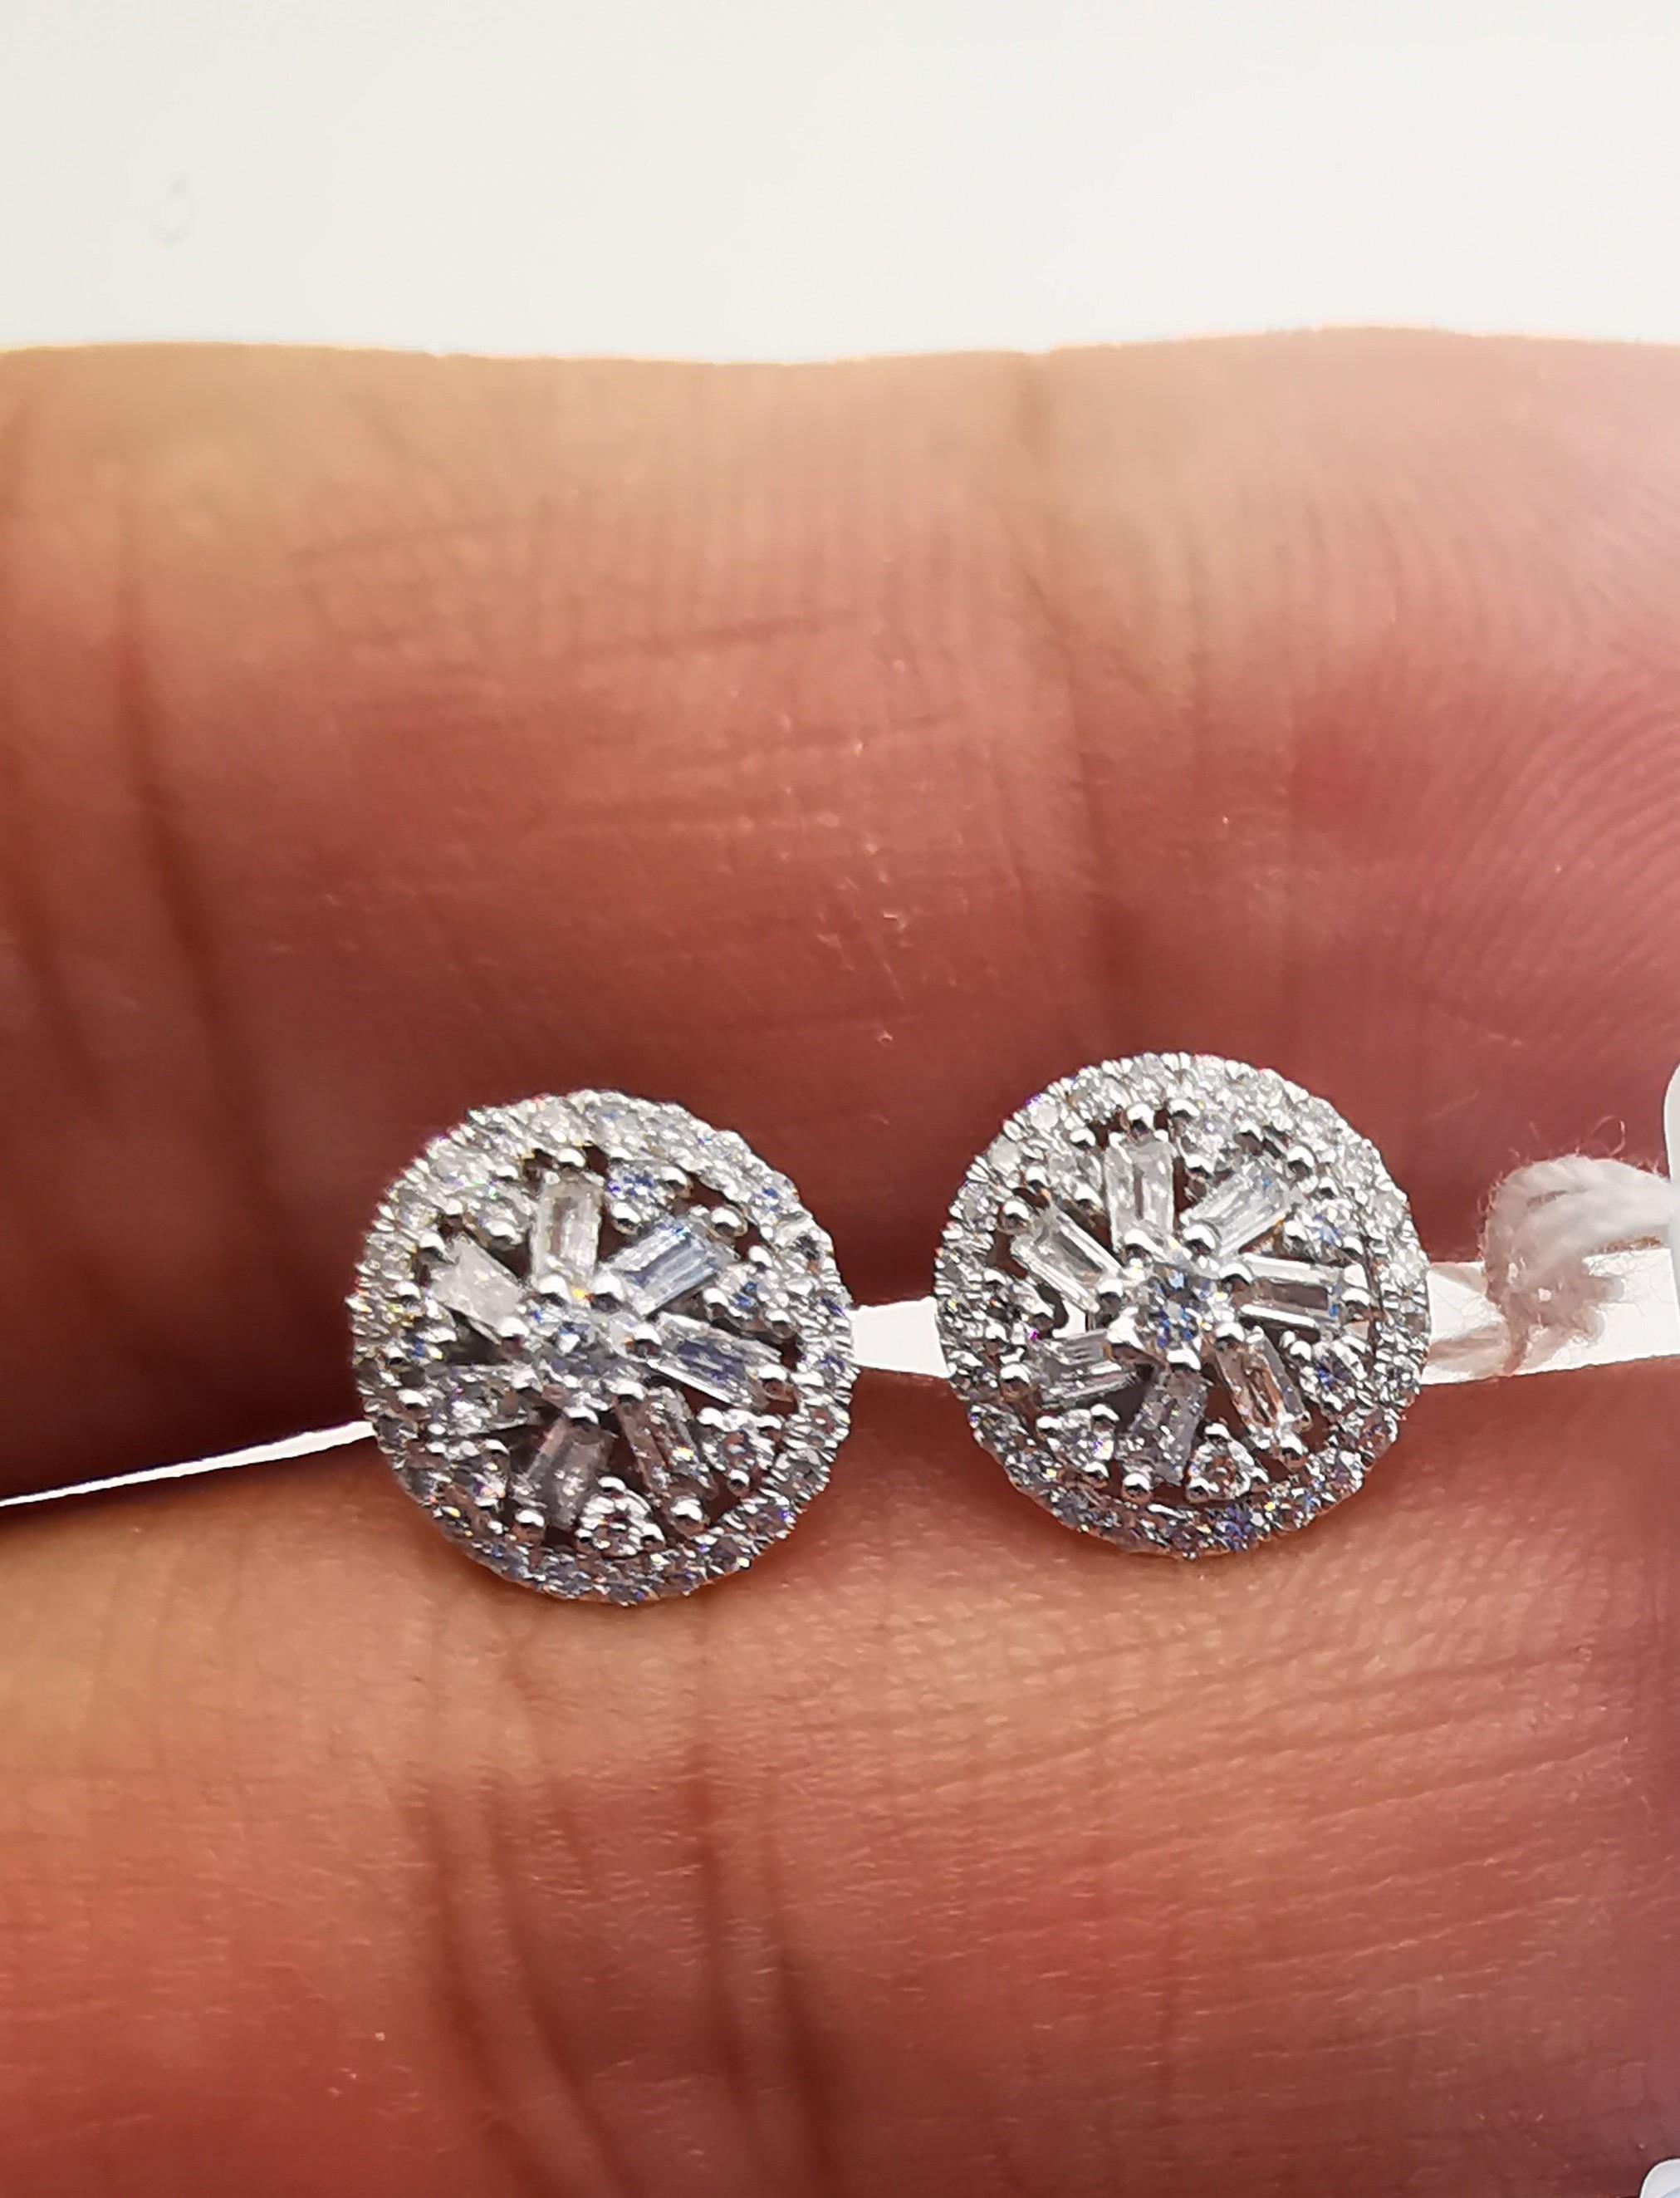 The Following Items we are offering is a Rare Important Radiant 18KT White Gold Stunning Diamond Halo Stud Earrings. Earrings feature Magnificent Rare Sparkling Fine Glittering Trillion Baguette and Round Diamonds!! T.C.W. Approx .50CTS!!! These